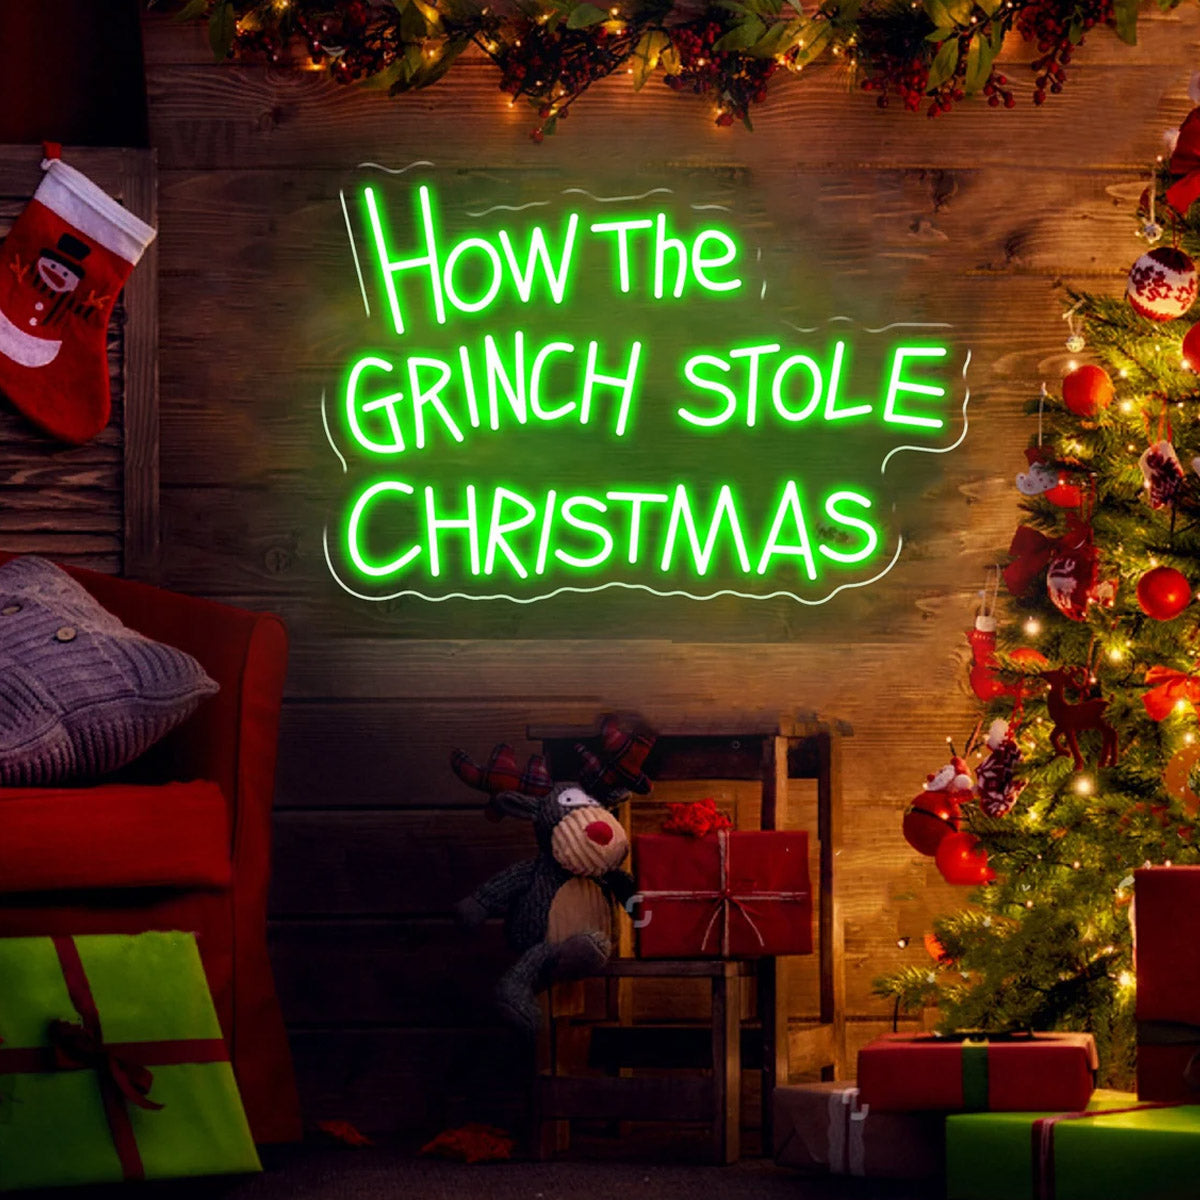 NEONIP-100% Handmade How The Grinch Stole Christmas Neon Sign Party Decoration